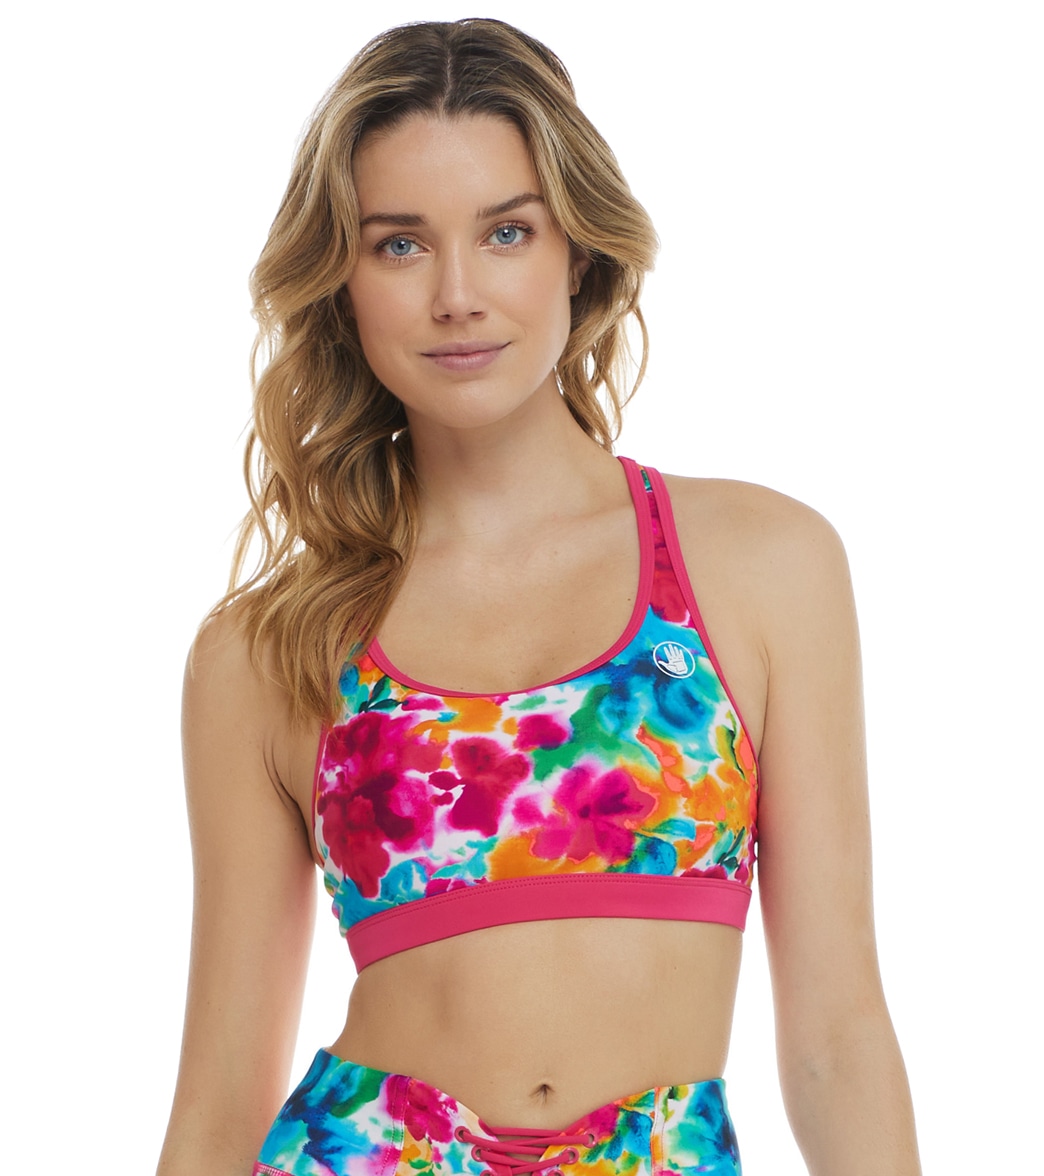 Body Glove Women's Volcano Active Equalizer X Sports Top - Multi Xl - Swimoutlet.com